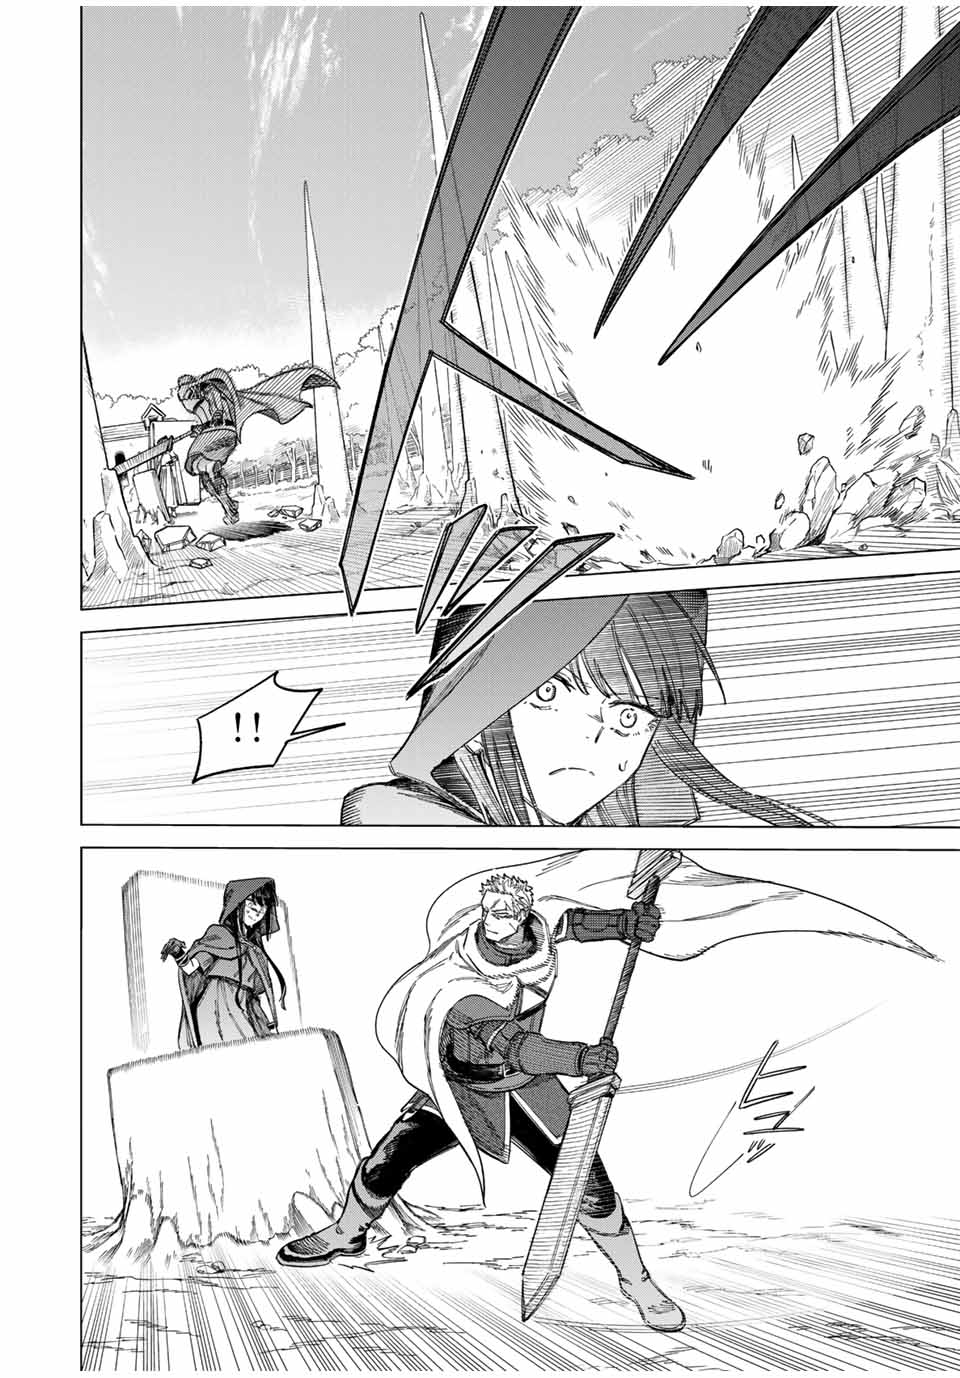 Witch and Mercenary 魔女と傭兵 第1.2話 - Page 6